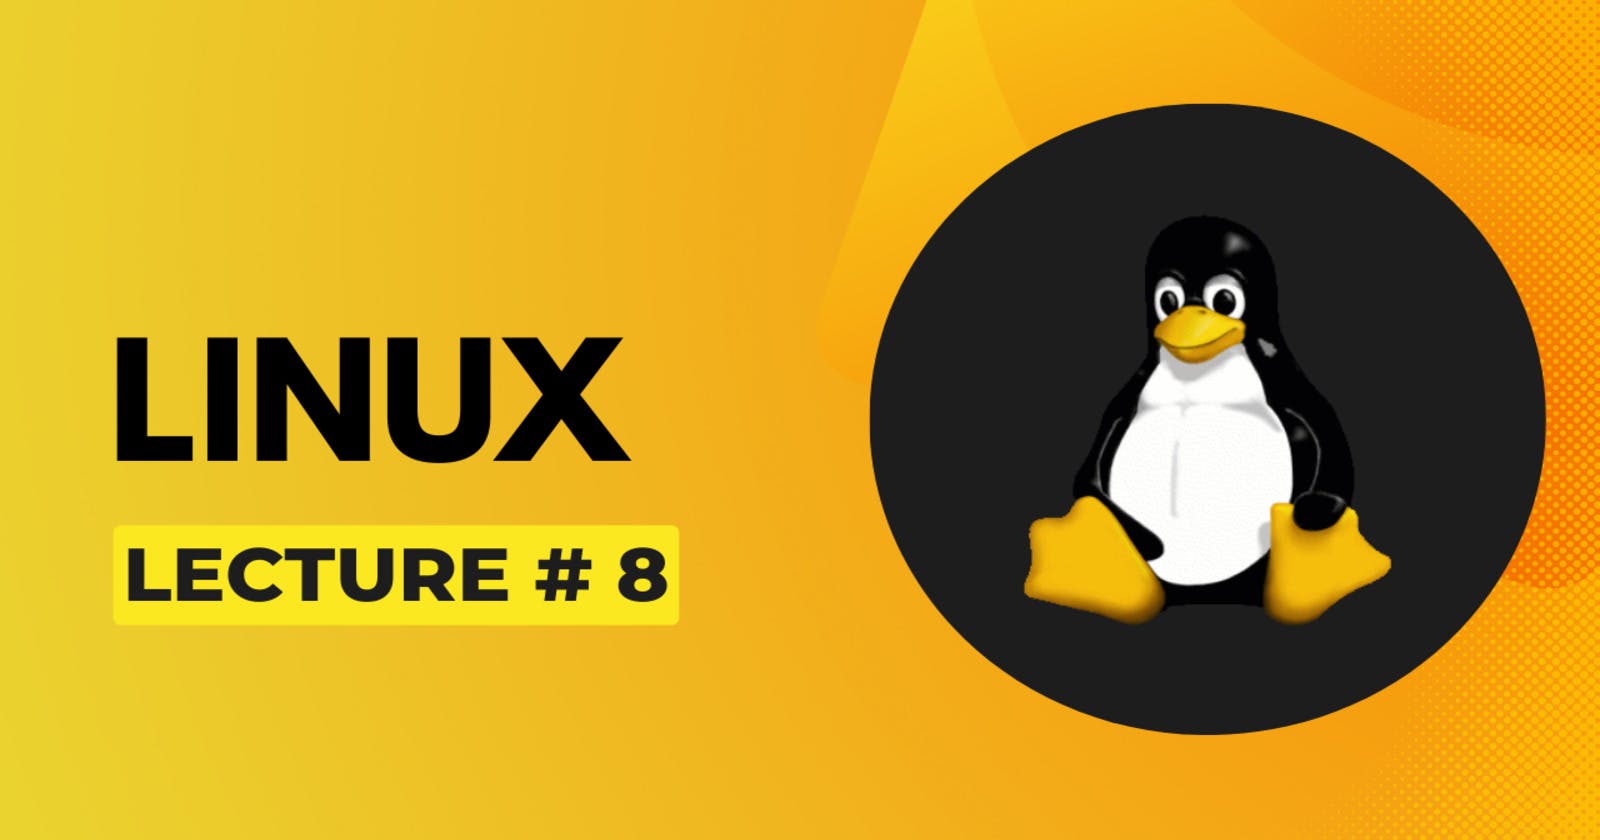 Lecture # 8 - Package Management in Linux